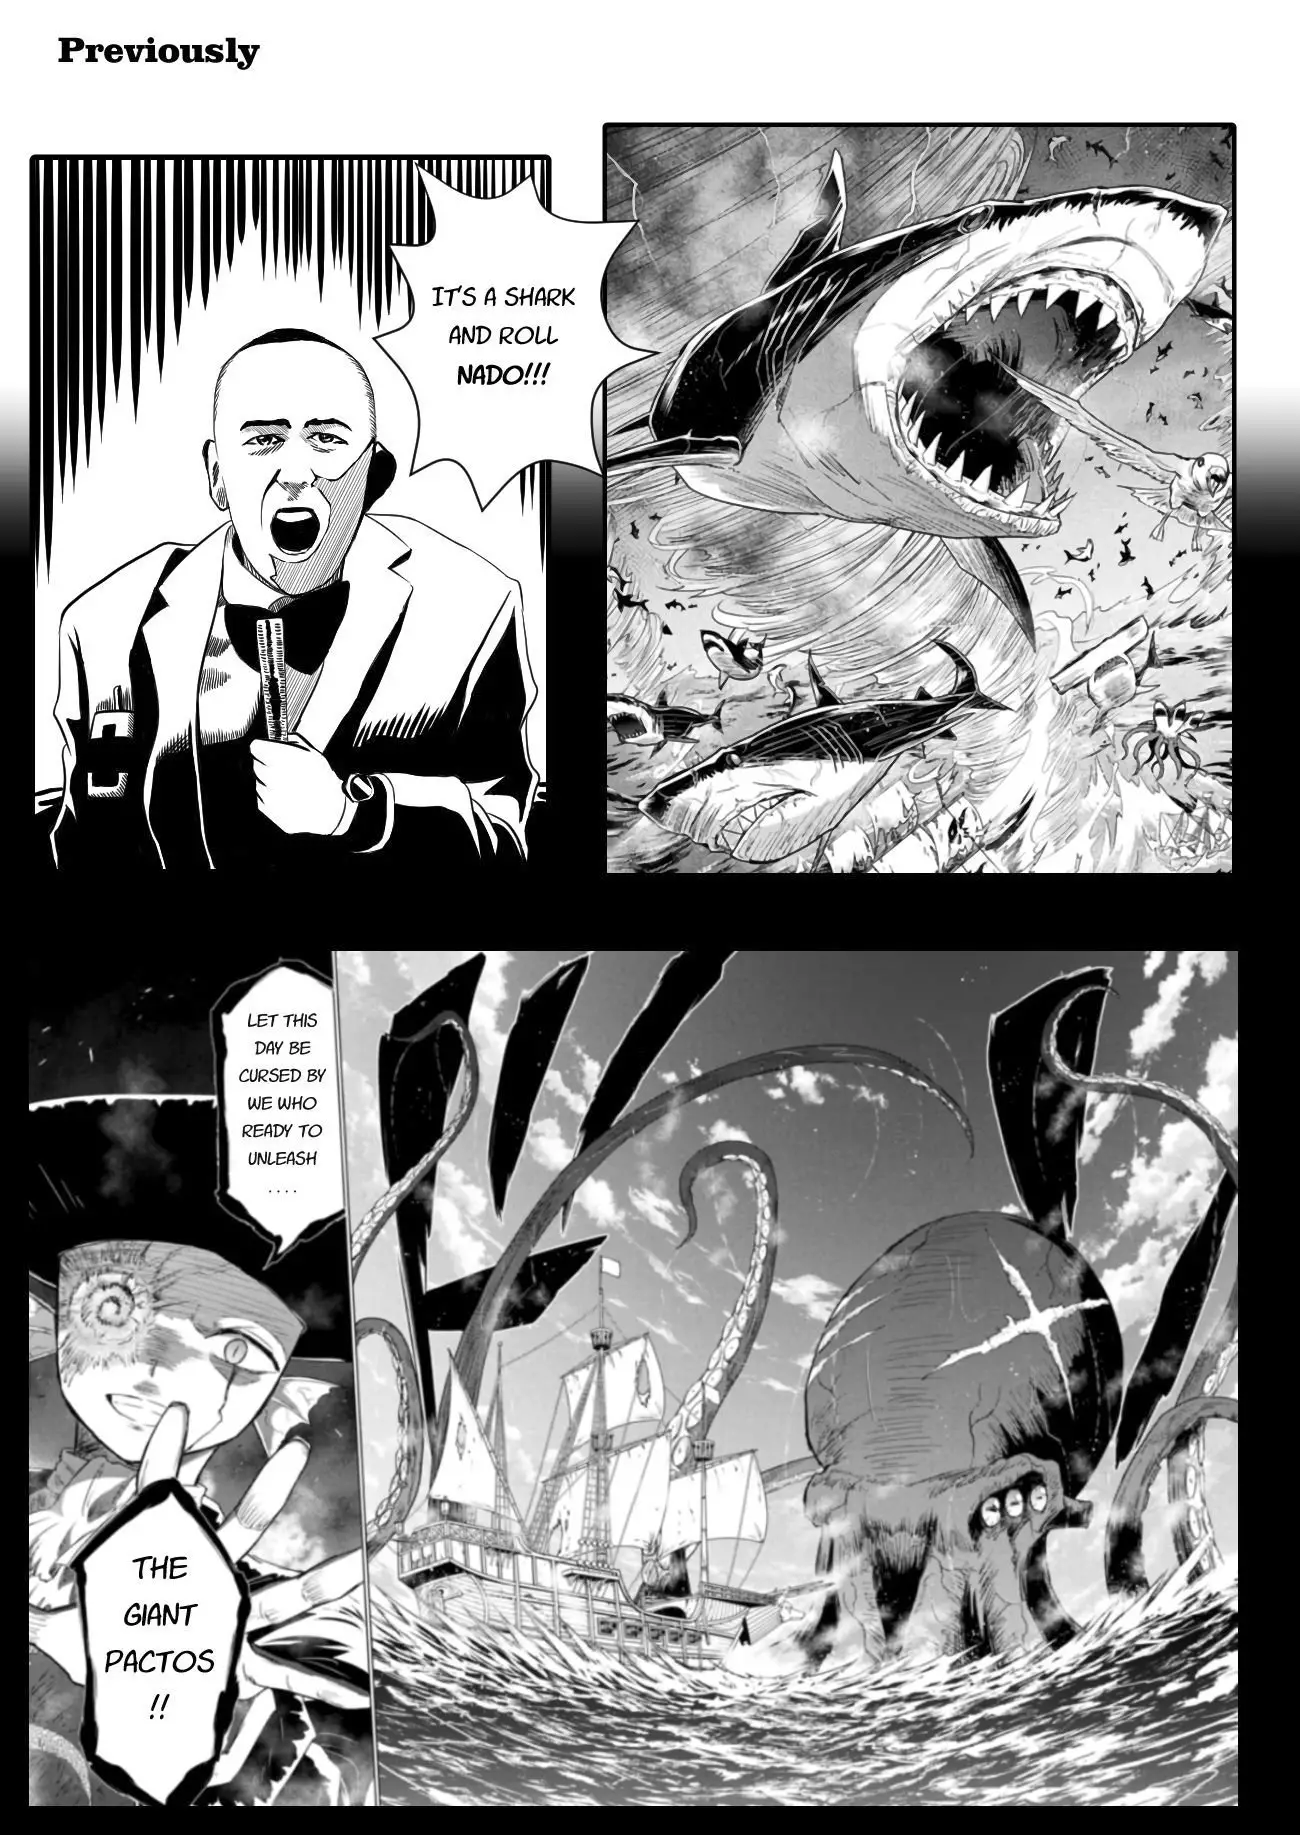 Killer Shark In Another World - 12 page 2